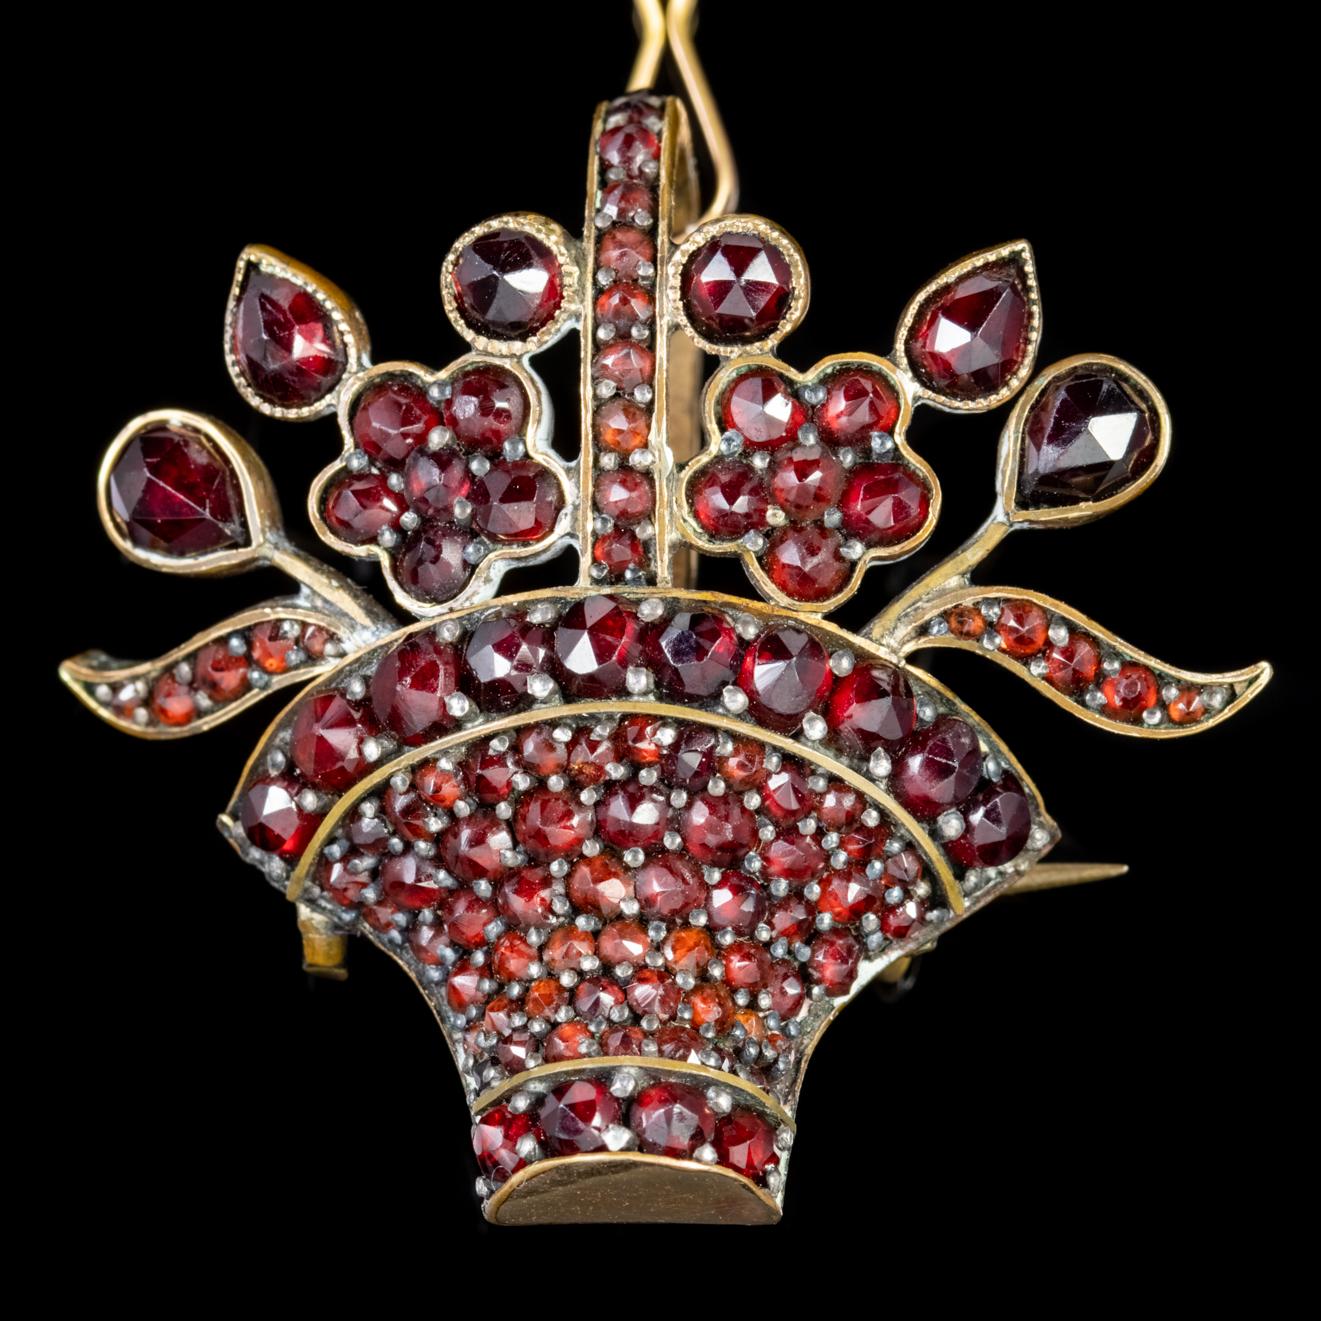 This wonderful antique Victorian pendant brooch depicts a lovely basket of flowers which is decorated with deep red Garnets which have been cut to fit the pendants unique design.  

The Garnet has been adored throughout history for its blazing red